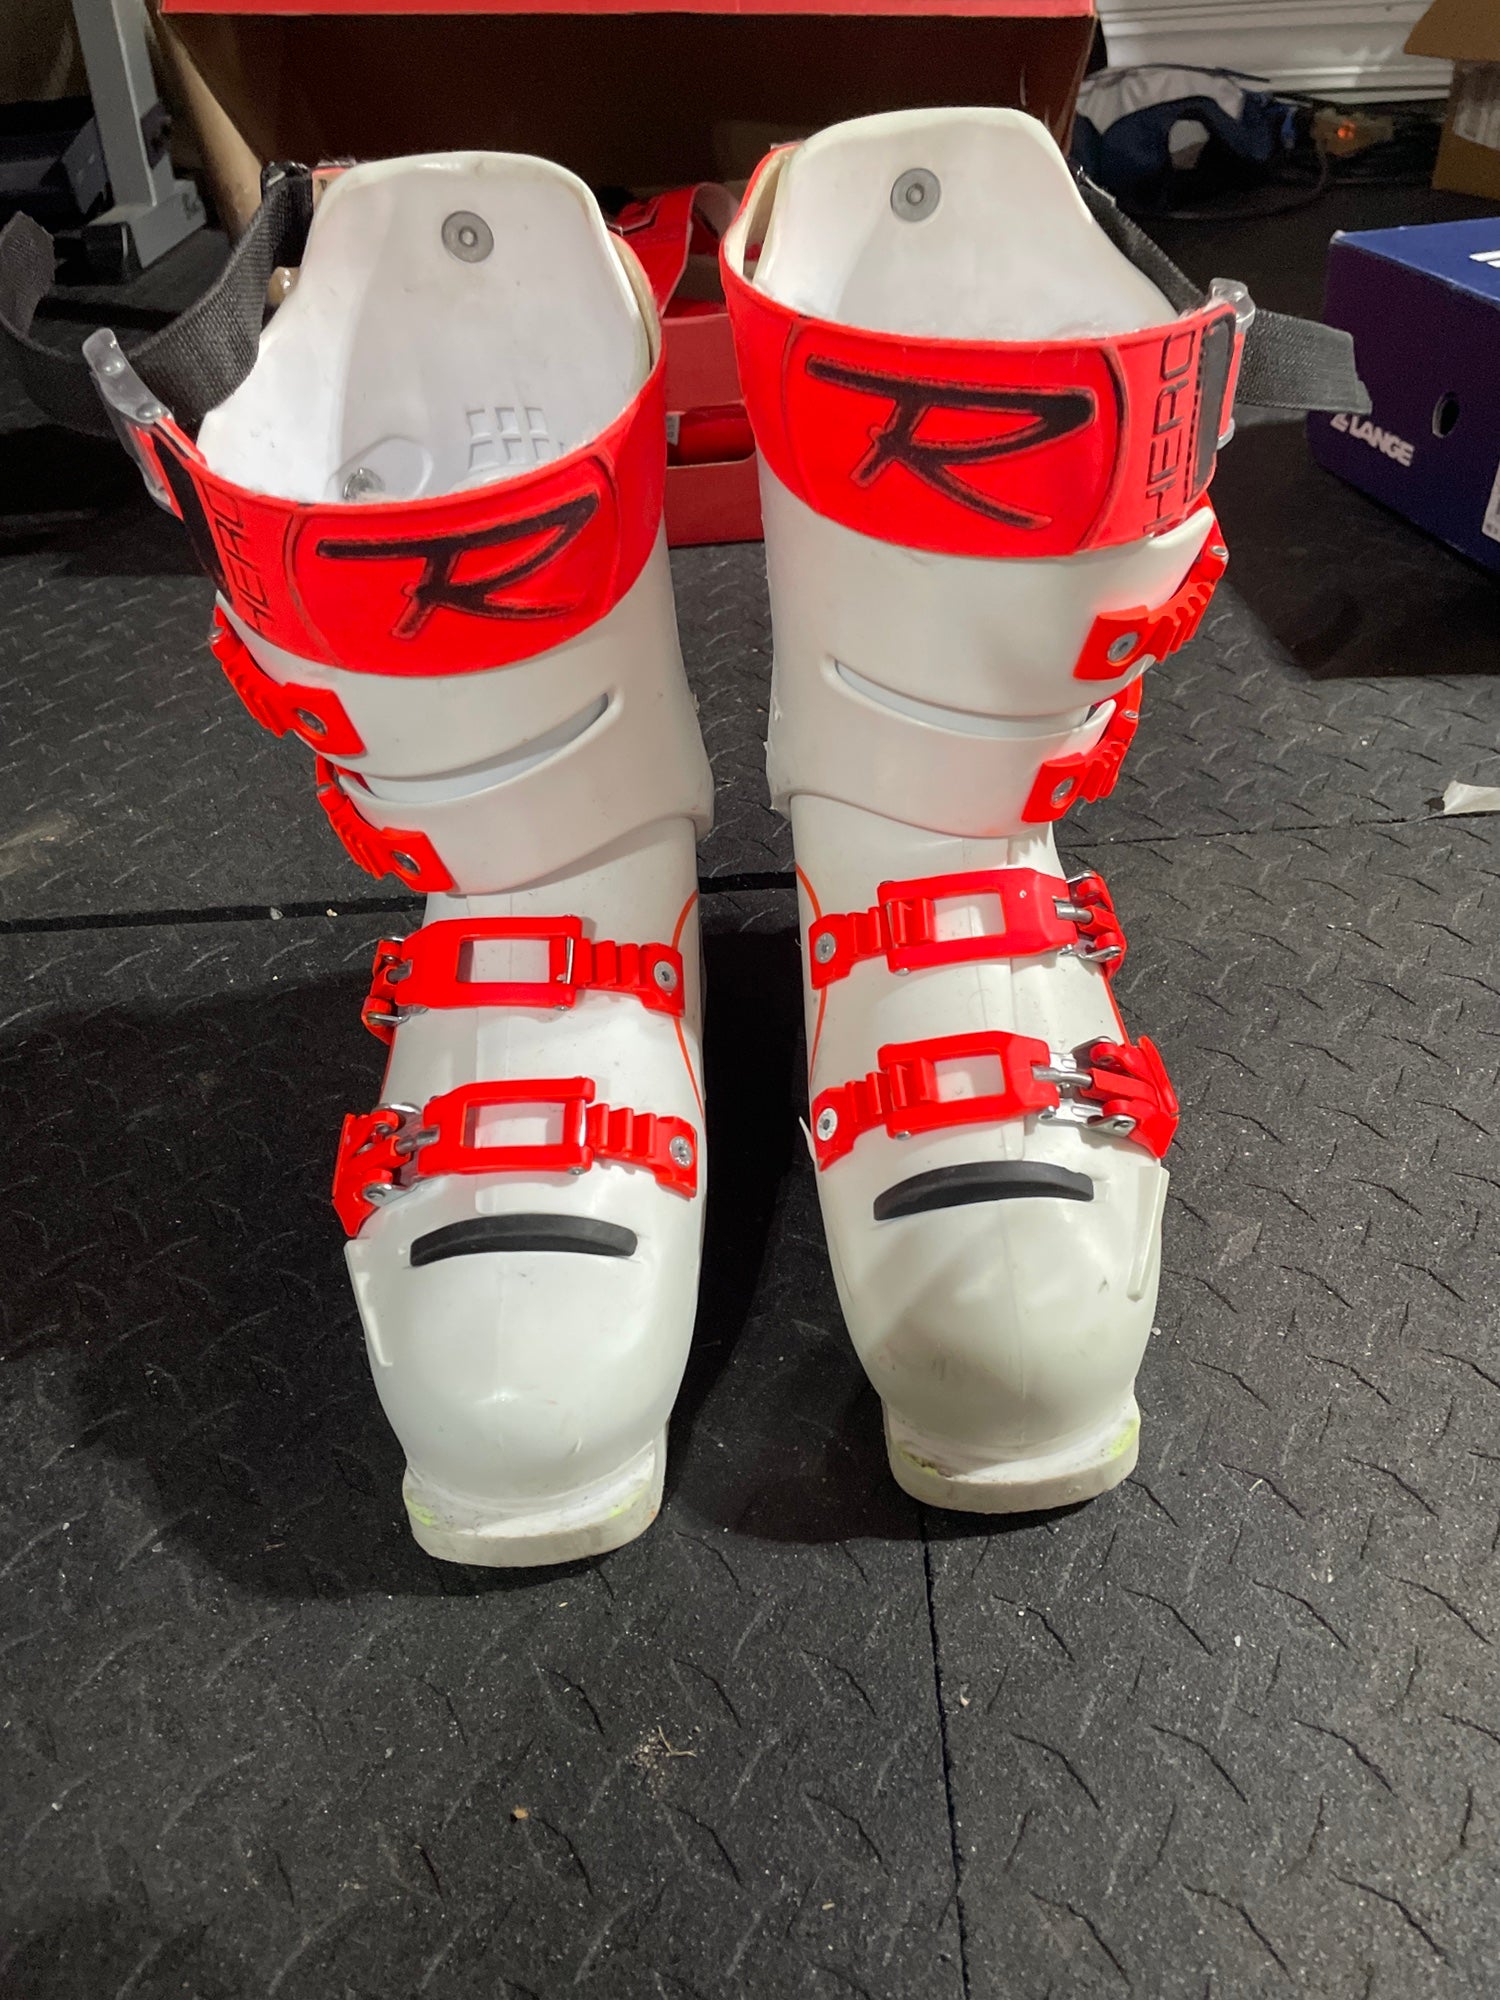 Rossignol Ski Race Boot Flex ZBwith mint condition liners